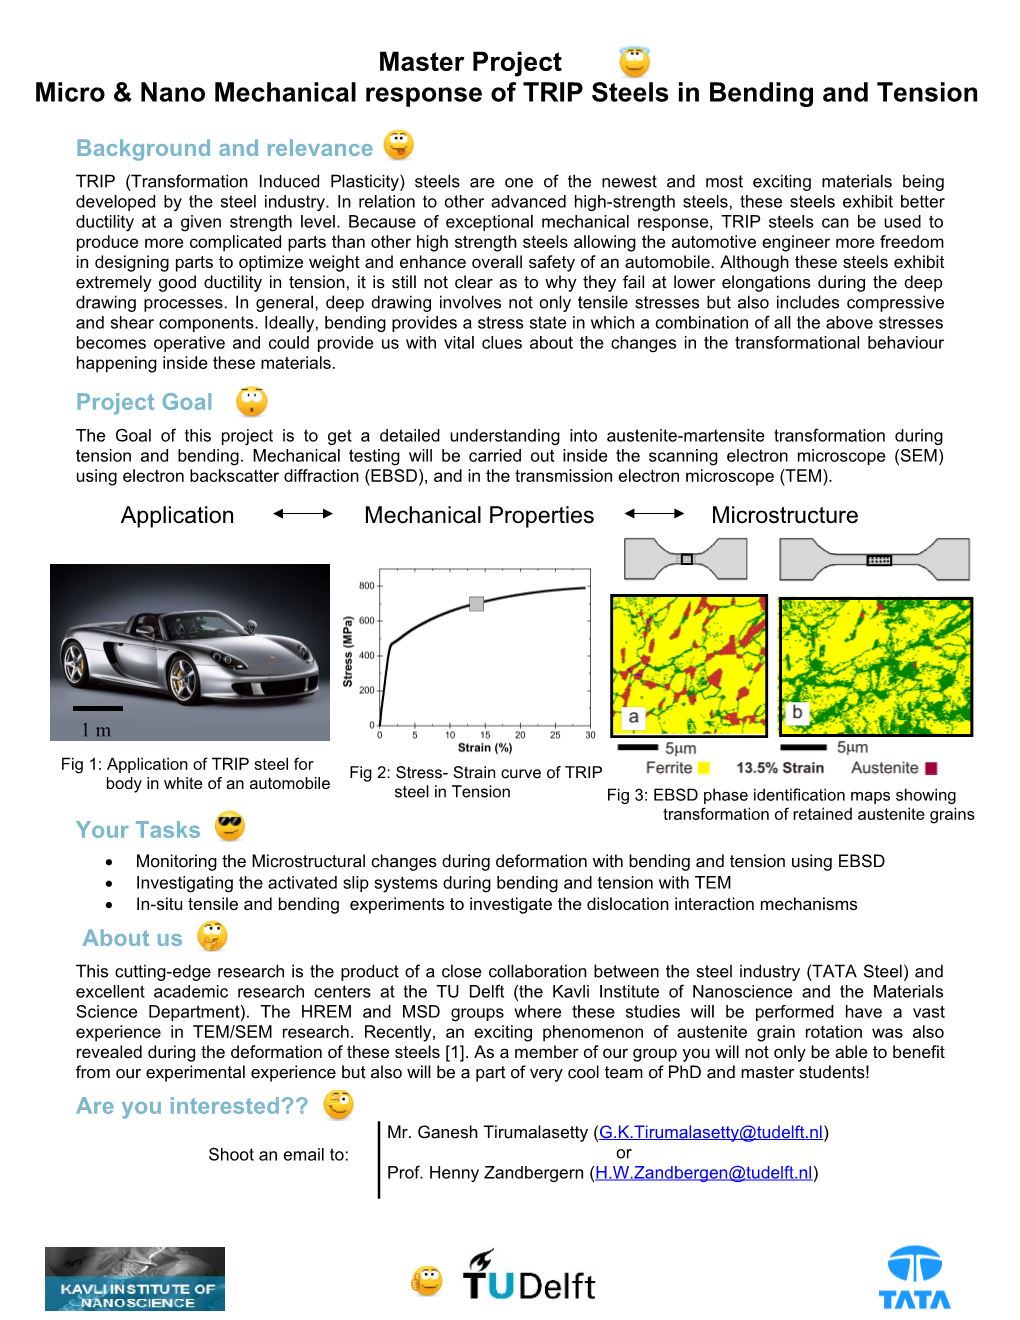 Micro & Nano Mechanical Response of TRIP Steels in Bending and Tension